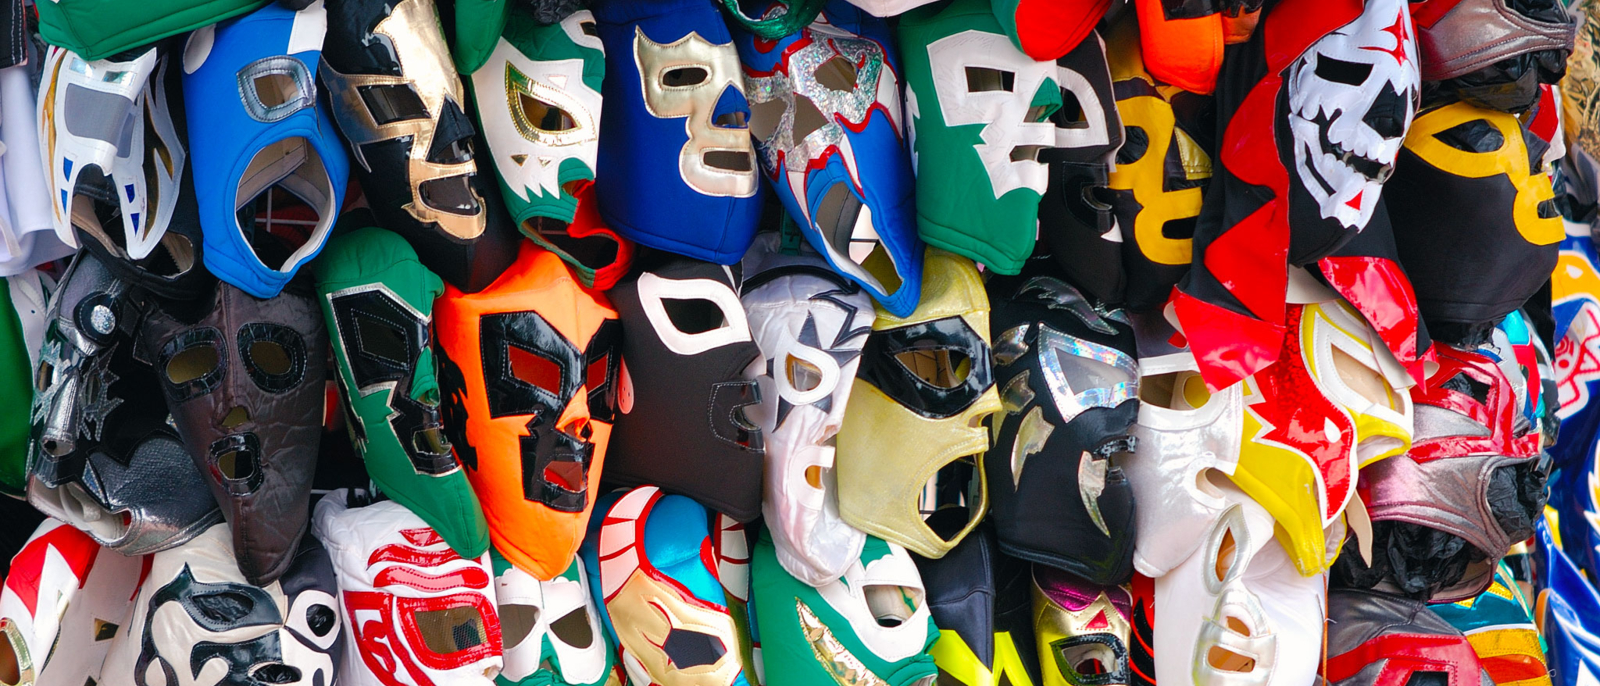 Lucha Libre mask Mexican wrestling is characterized by colorful masks, rapid sequences of holds and maneuvers, as well as "high-flying" maneuvers, some of which have been adopted in the United States.